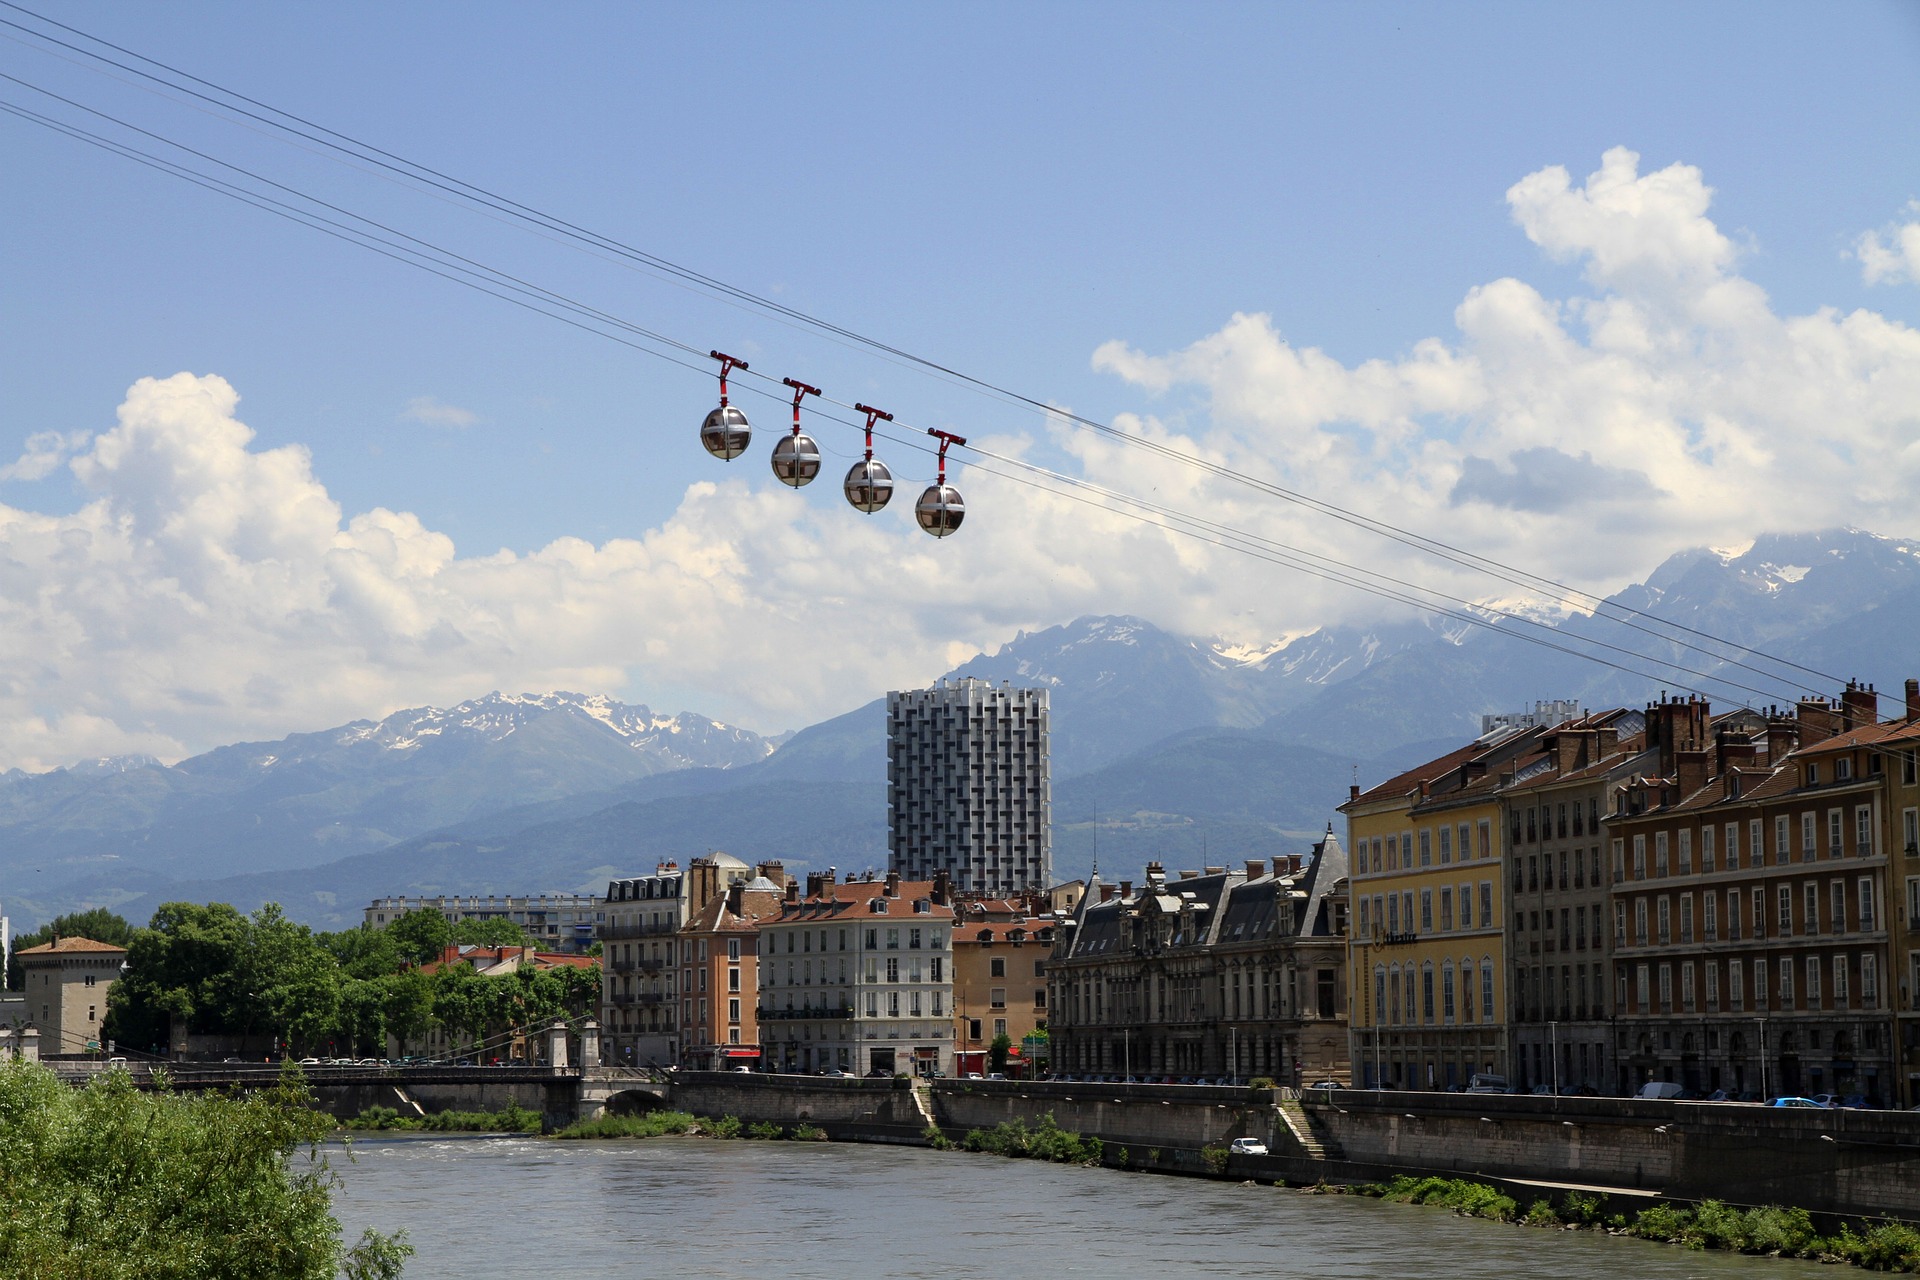 The city of Grenoble, the Alps in the distance